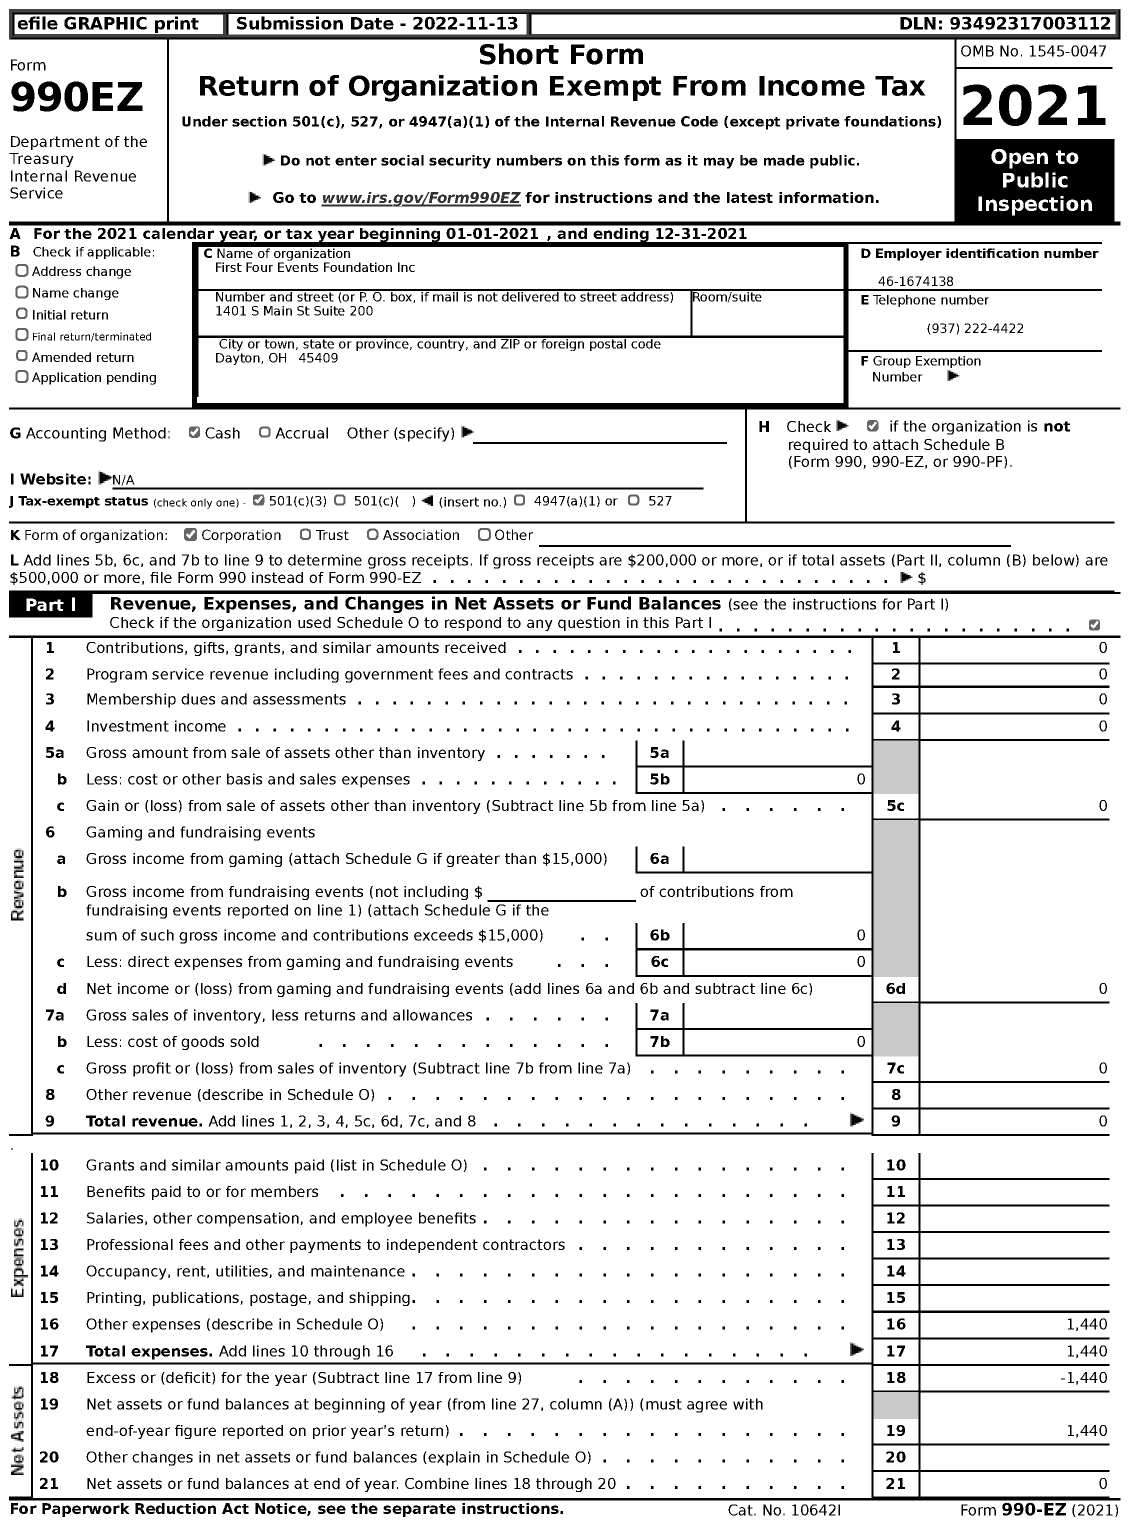 Image of first page of 2021 Form 990EZ for First Four Events Foundation